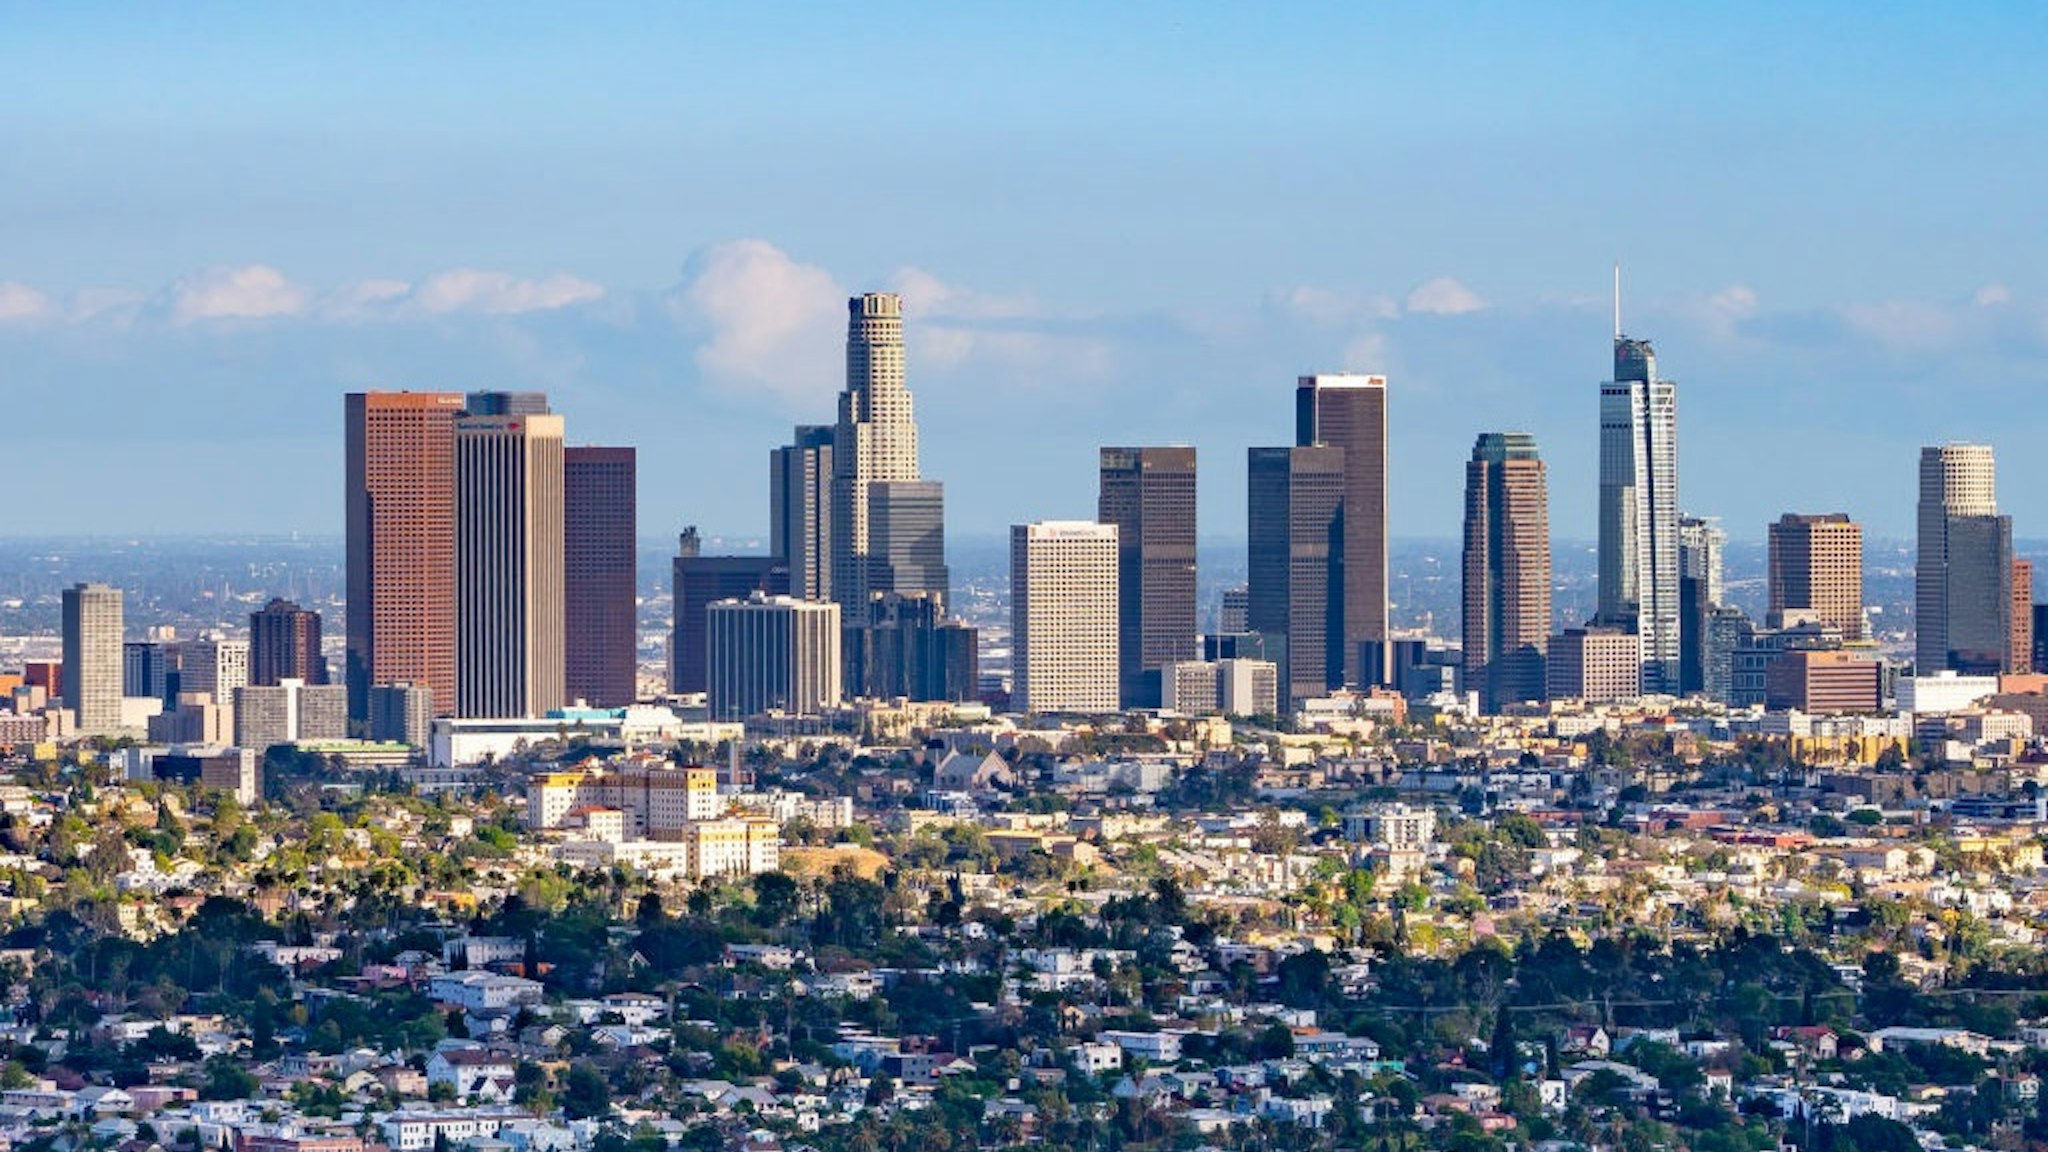 LOS ANGELES, CA - APRIL 26: General view of the Downtown Los Angeles skyline on April 26, 2021 in Los Angeles, California.